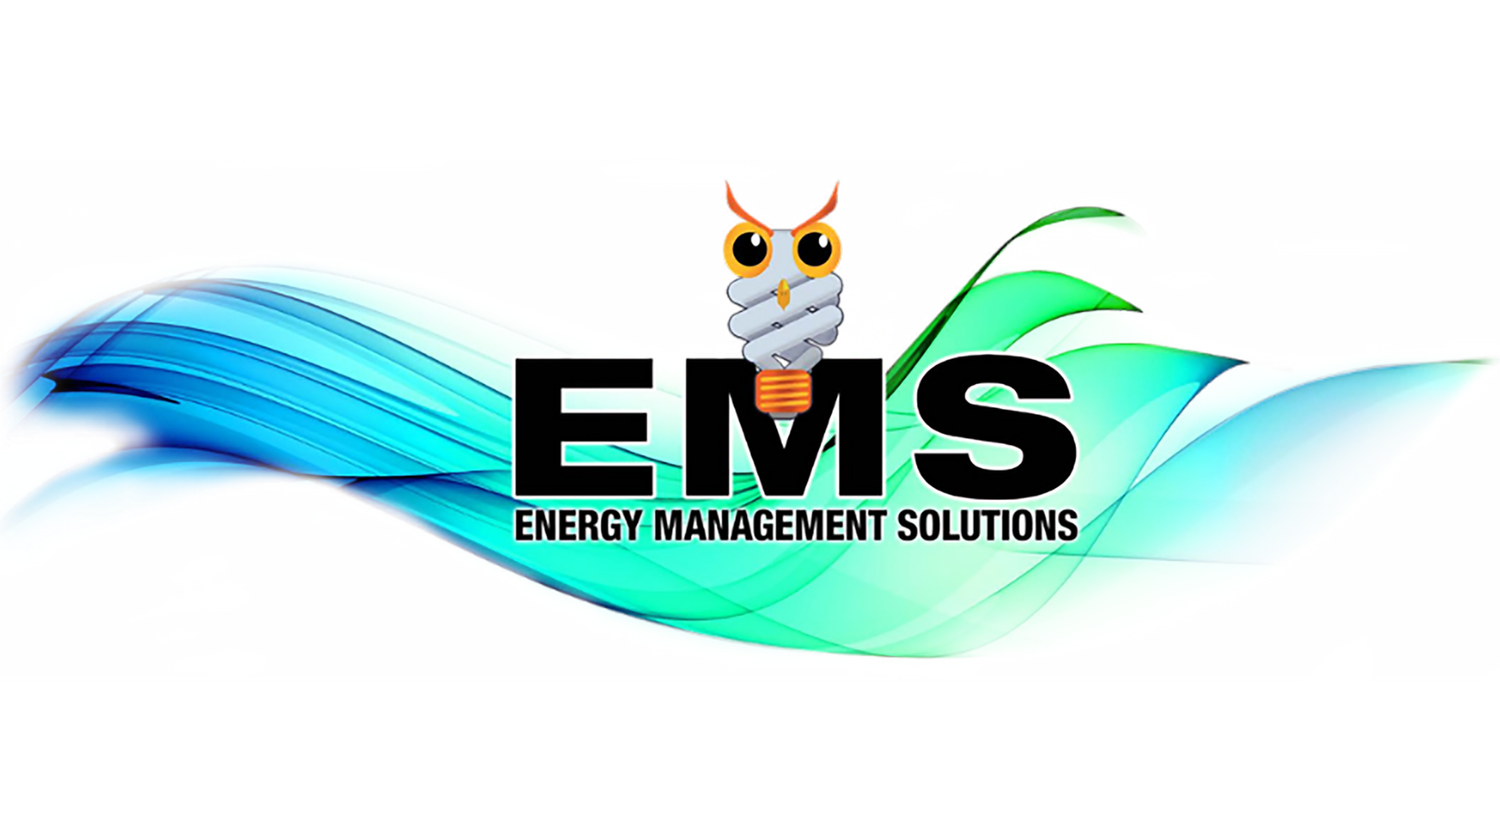 Energy Management Solutions